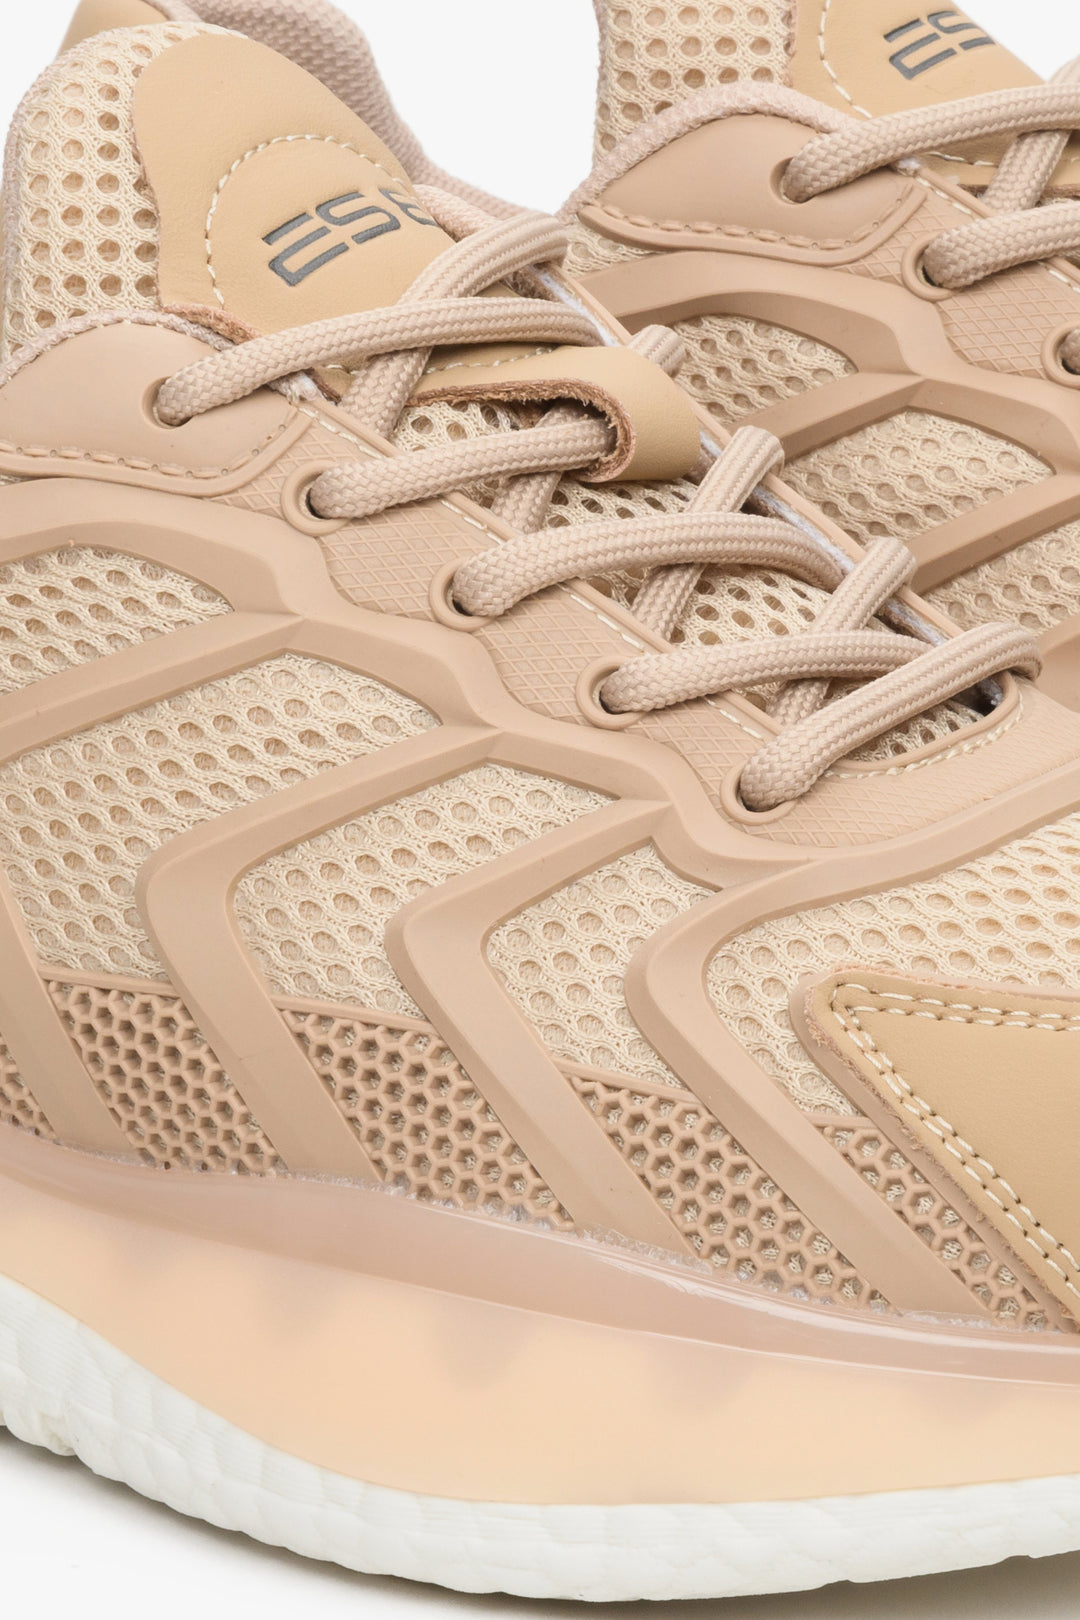 Women's beige sneakers by ES8 - close-up of the laces.